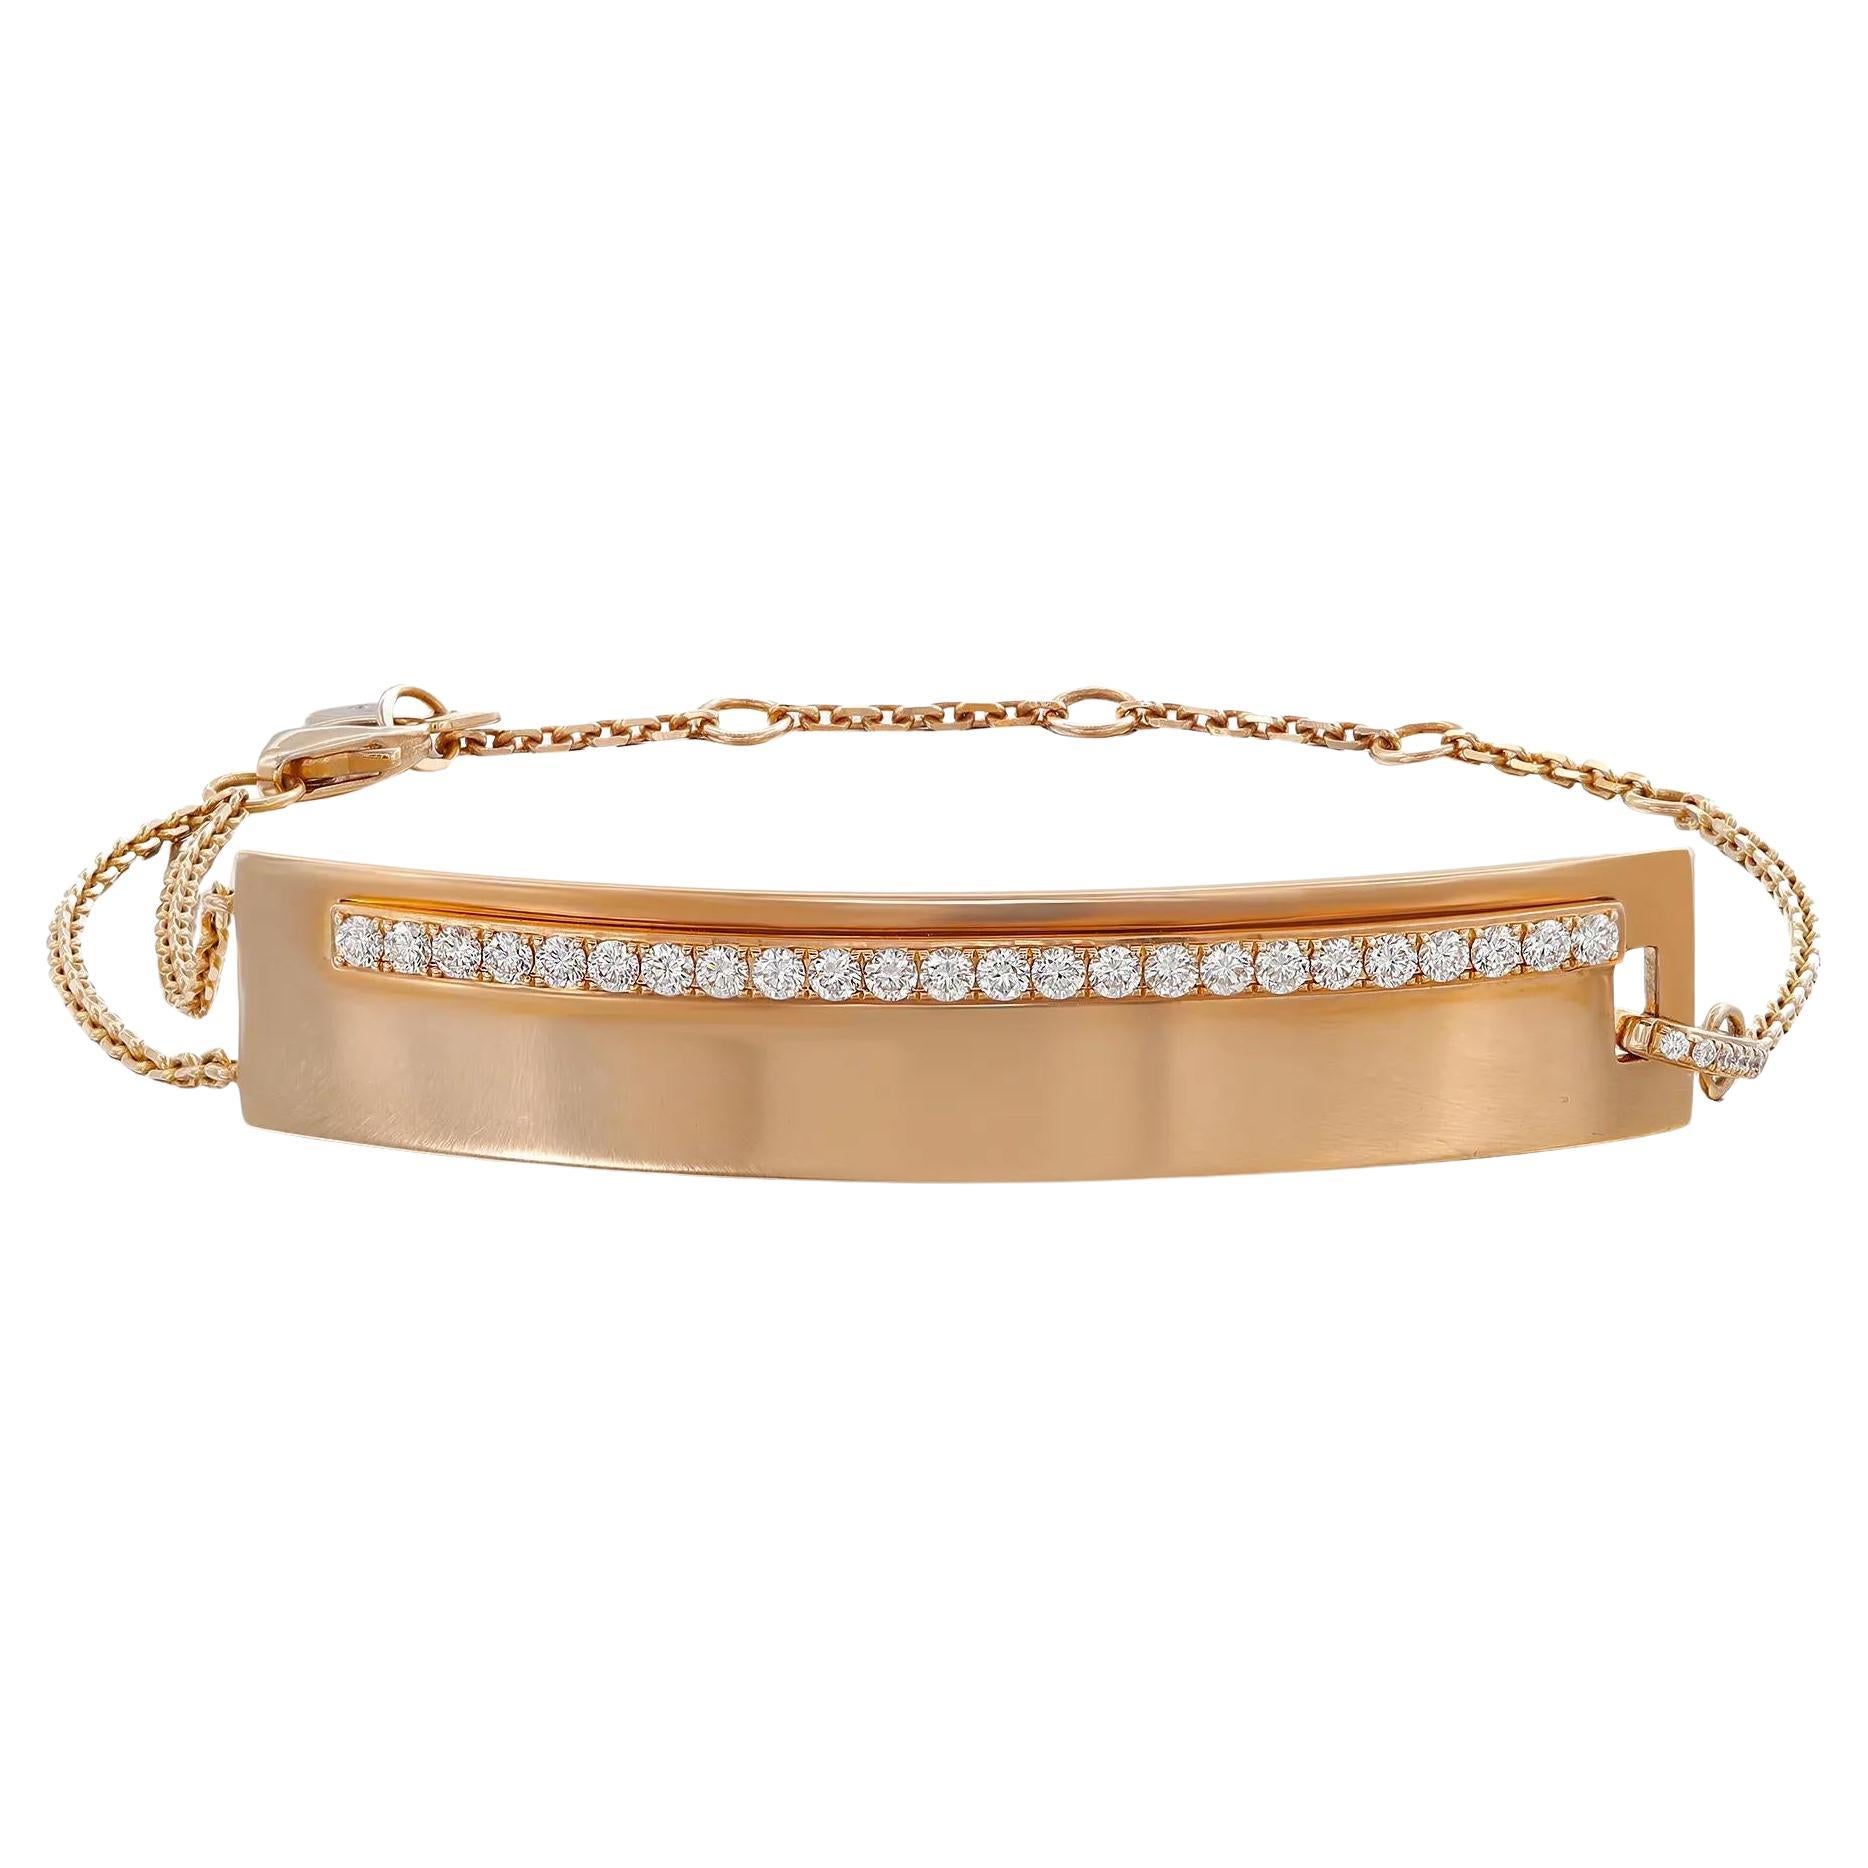 Messika 0.44Cttw Kate Diamant Kette Armband 18K Rose Gold 7,5 Zoll